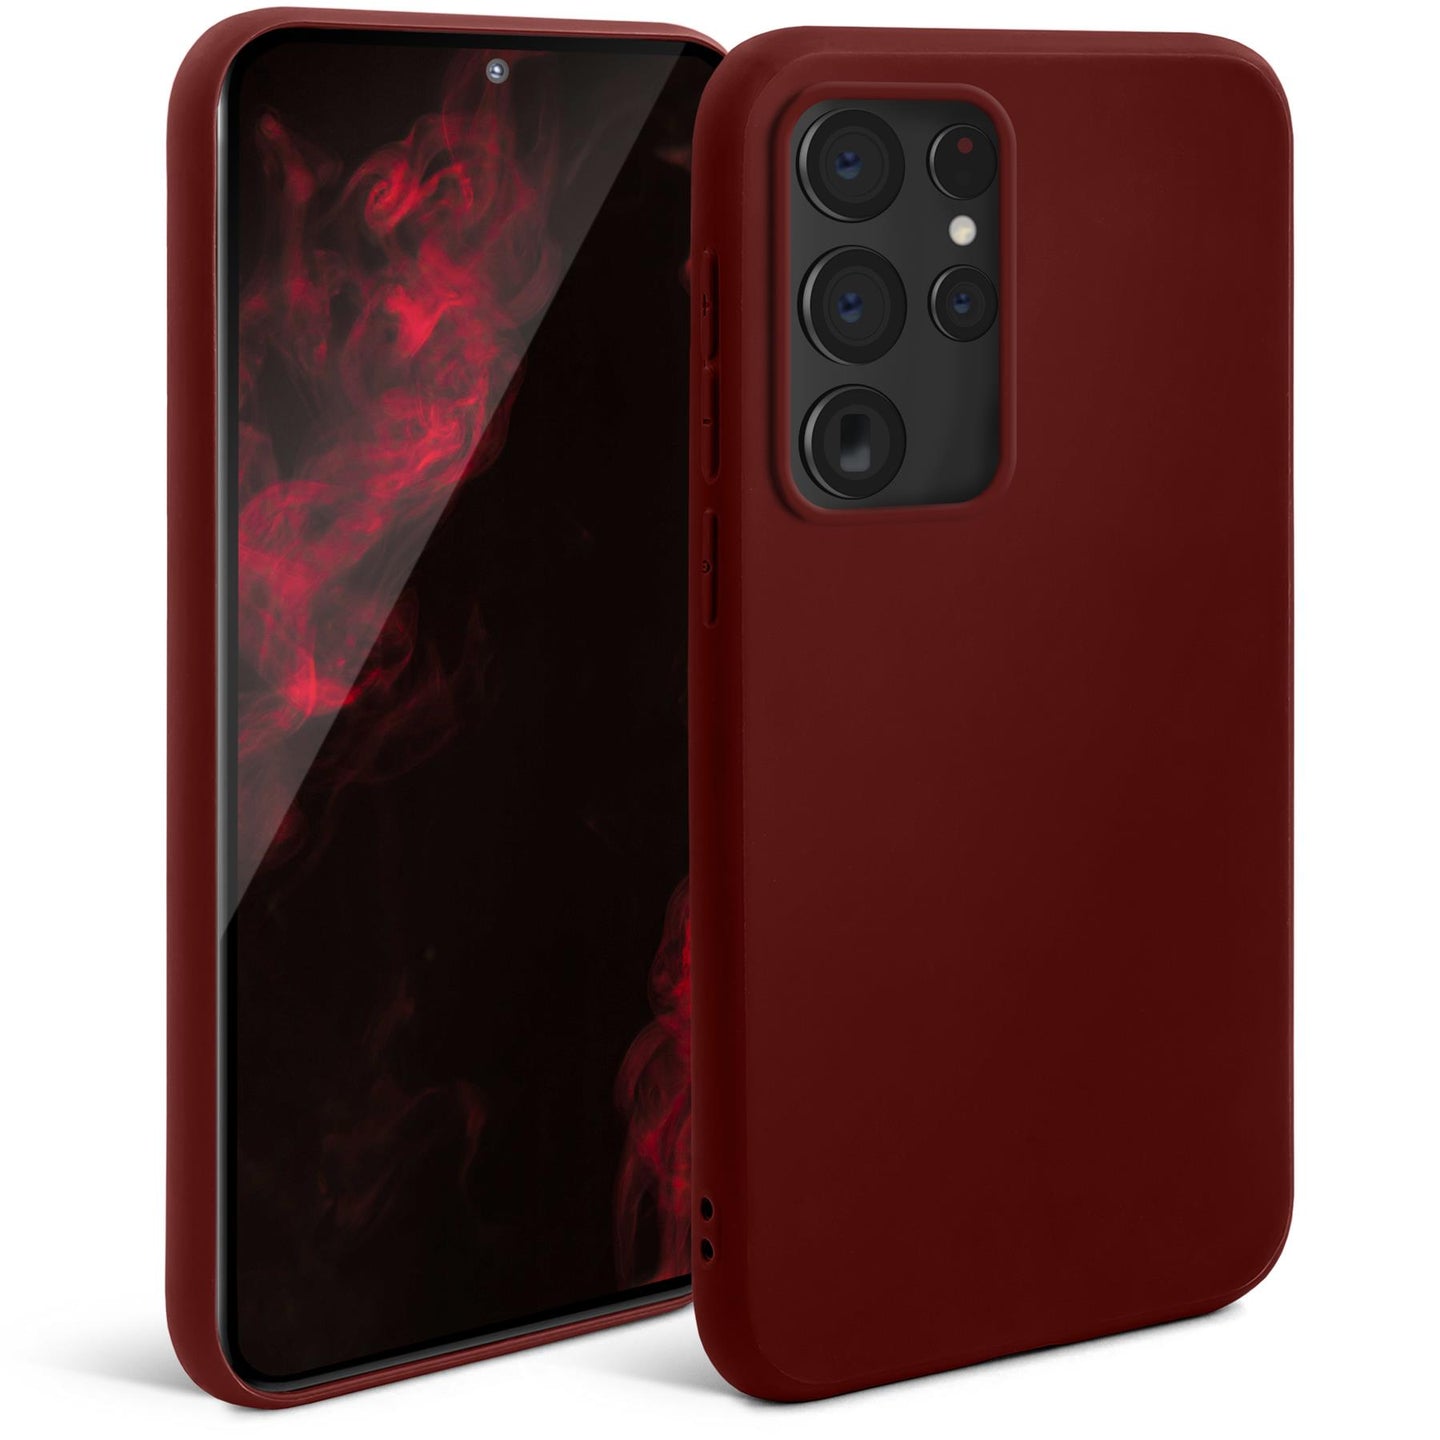 Moozy Minimalist Series Silicone Case for Samsung S22 Ultra, Wine Red - Matte Finish Lightweight Mobile Phone Case Slim Soft Protective TPU Cover with Matte Surface